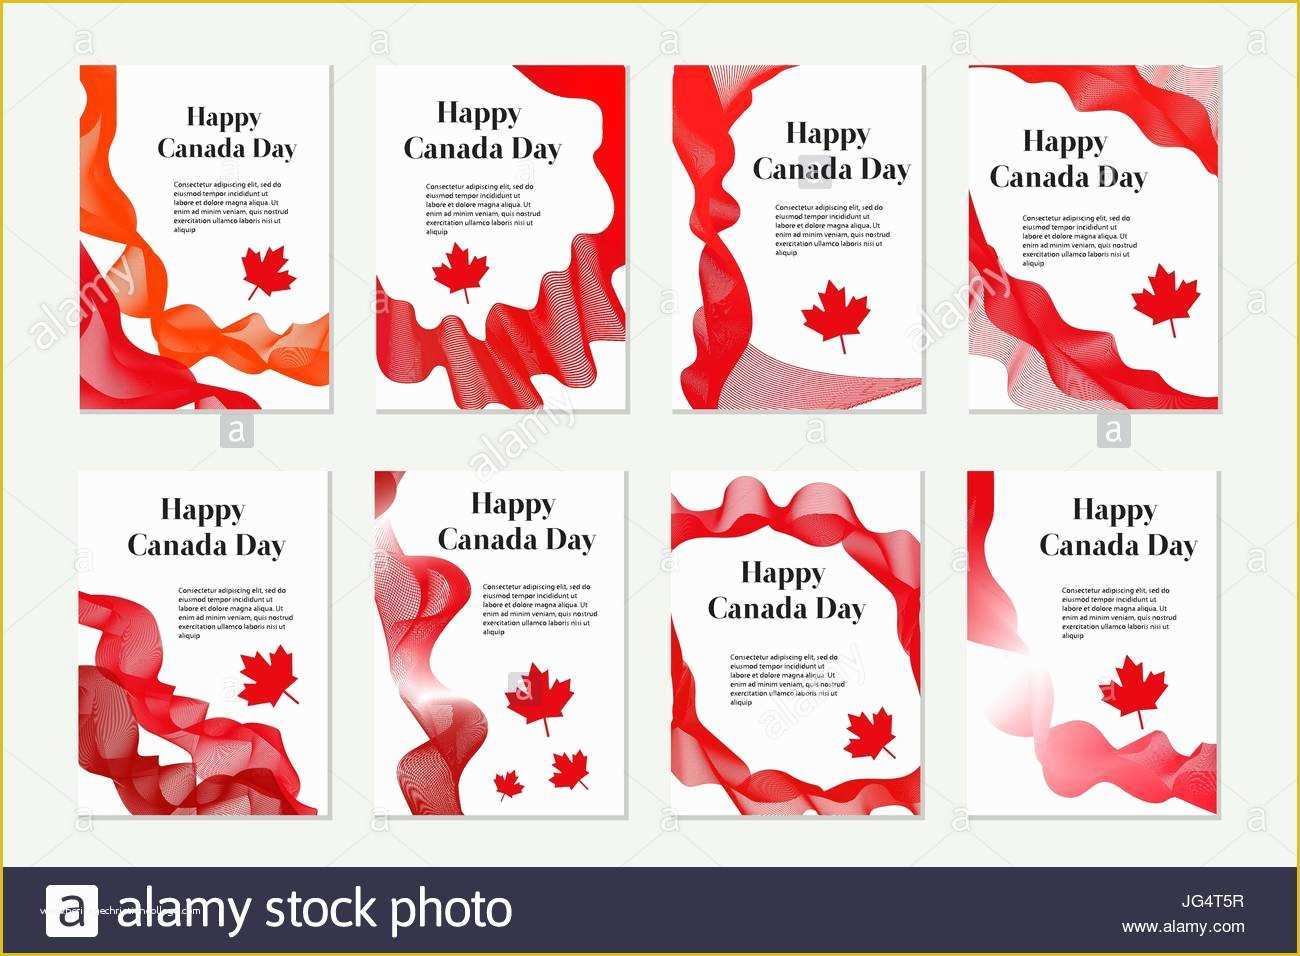 Canada Day Flyer Template Free Of Maple Leaf Logo Stock S & Maple Leaf Logo Stock